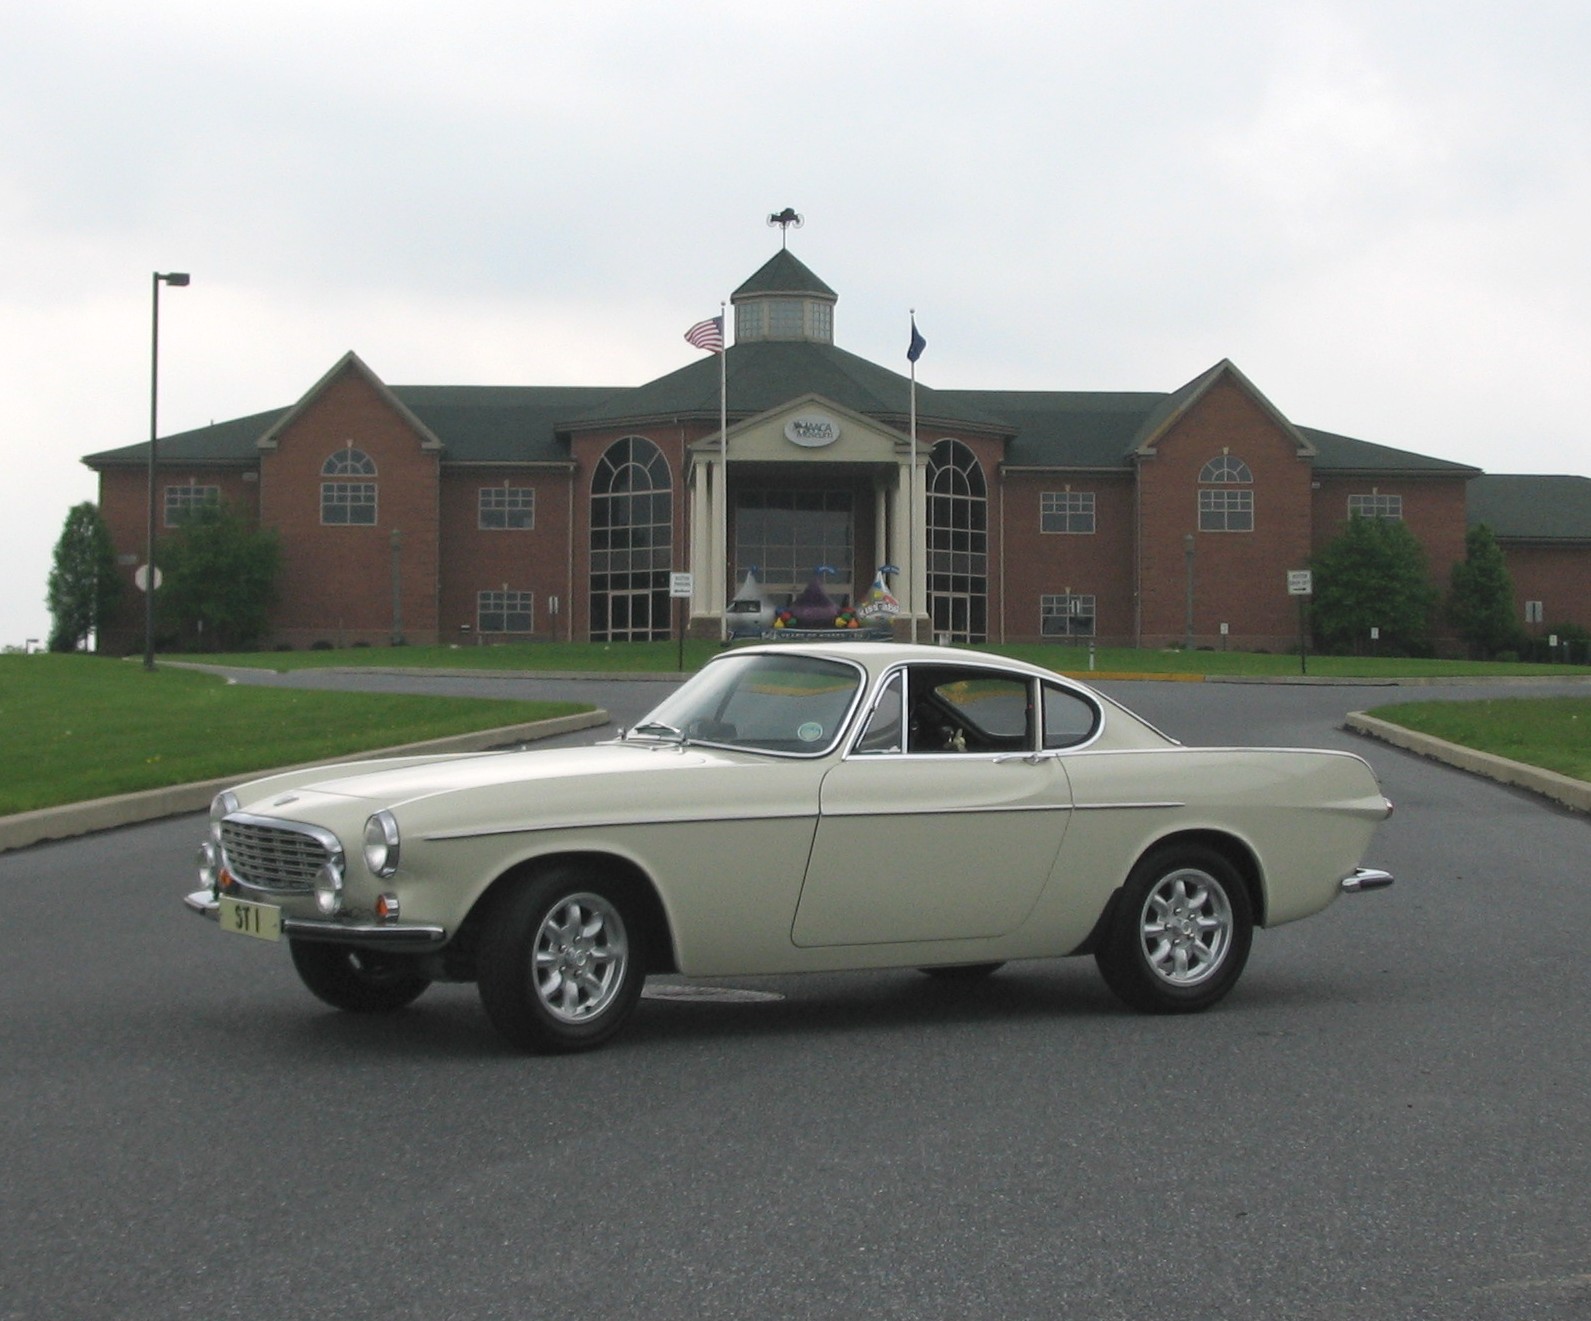 ST1--one of the original Volvo P1800s that was used in the original TV